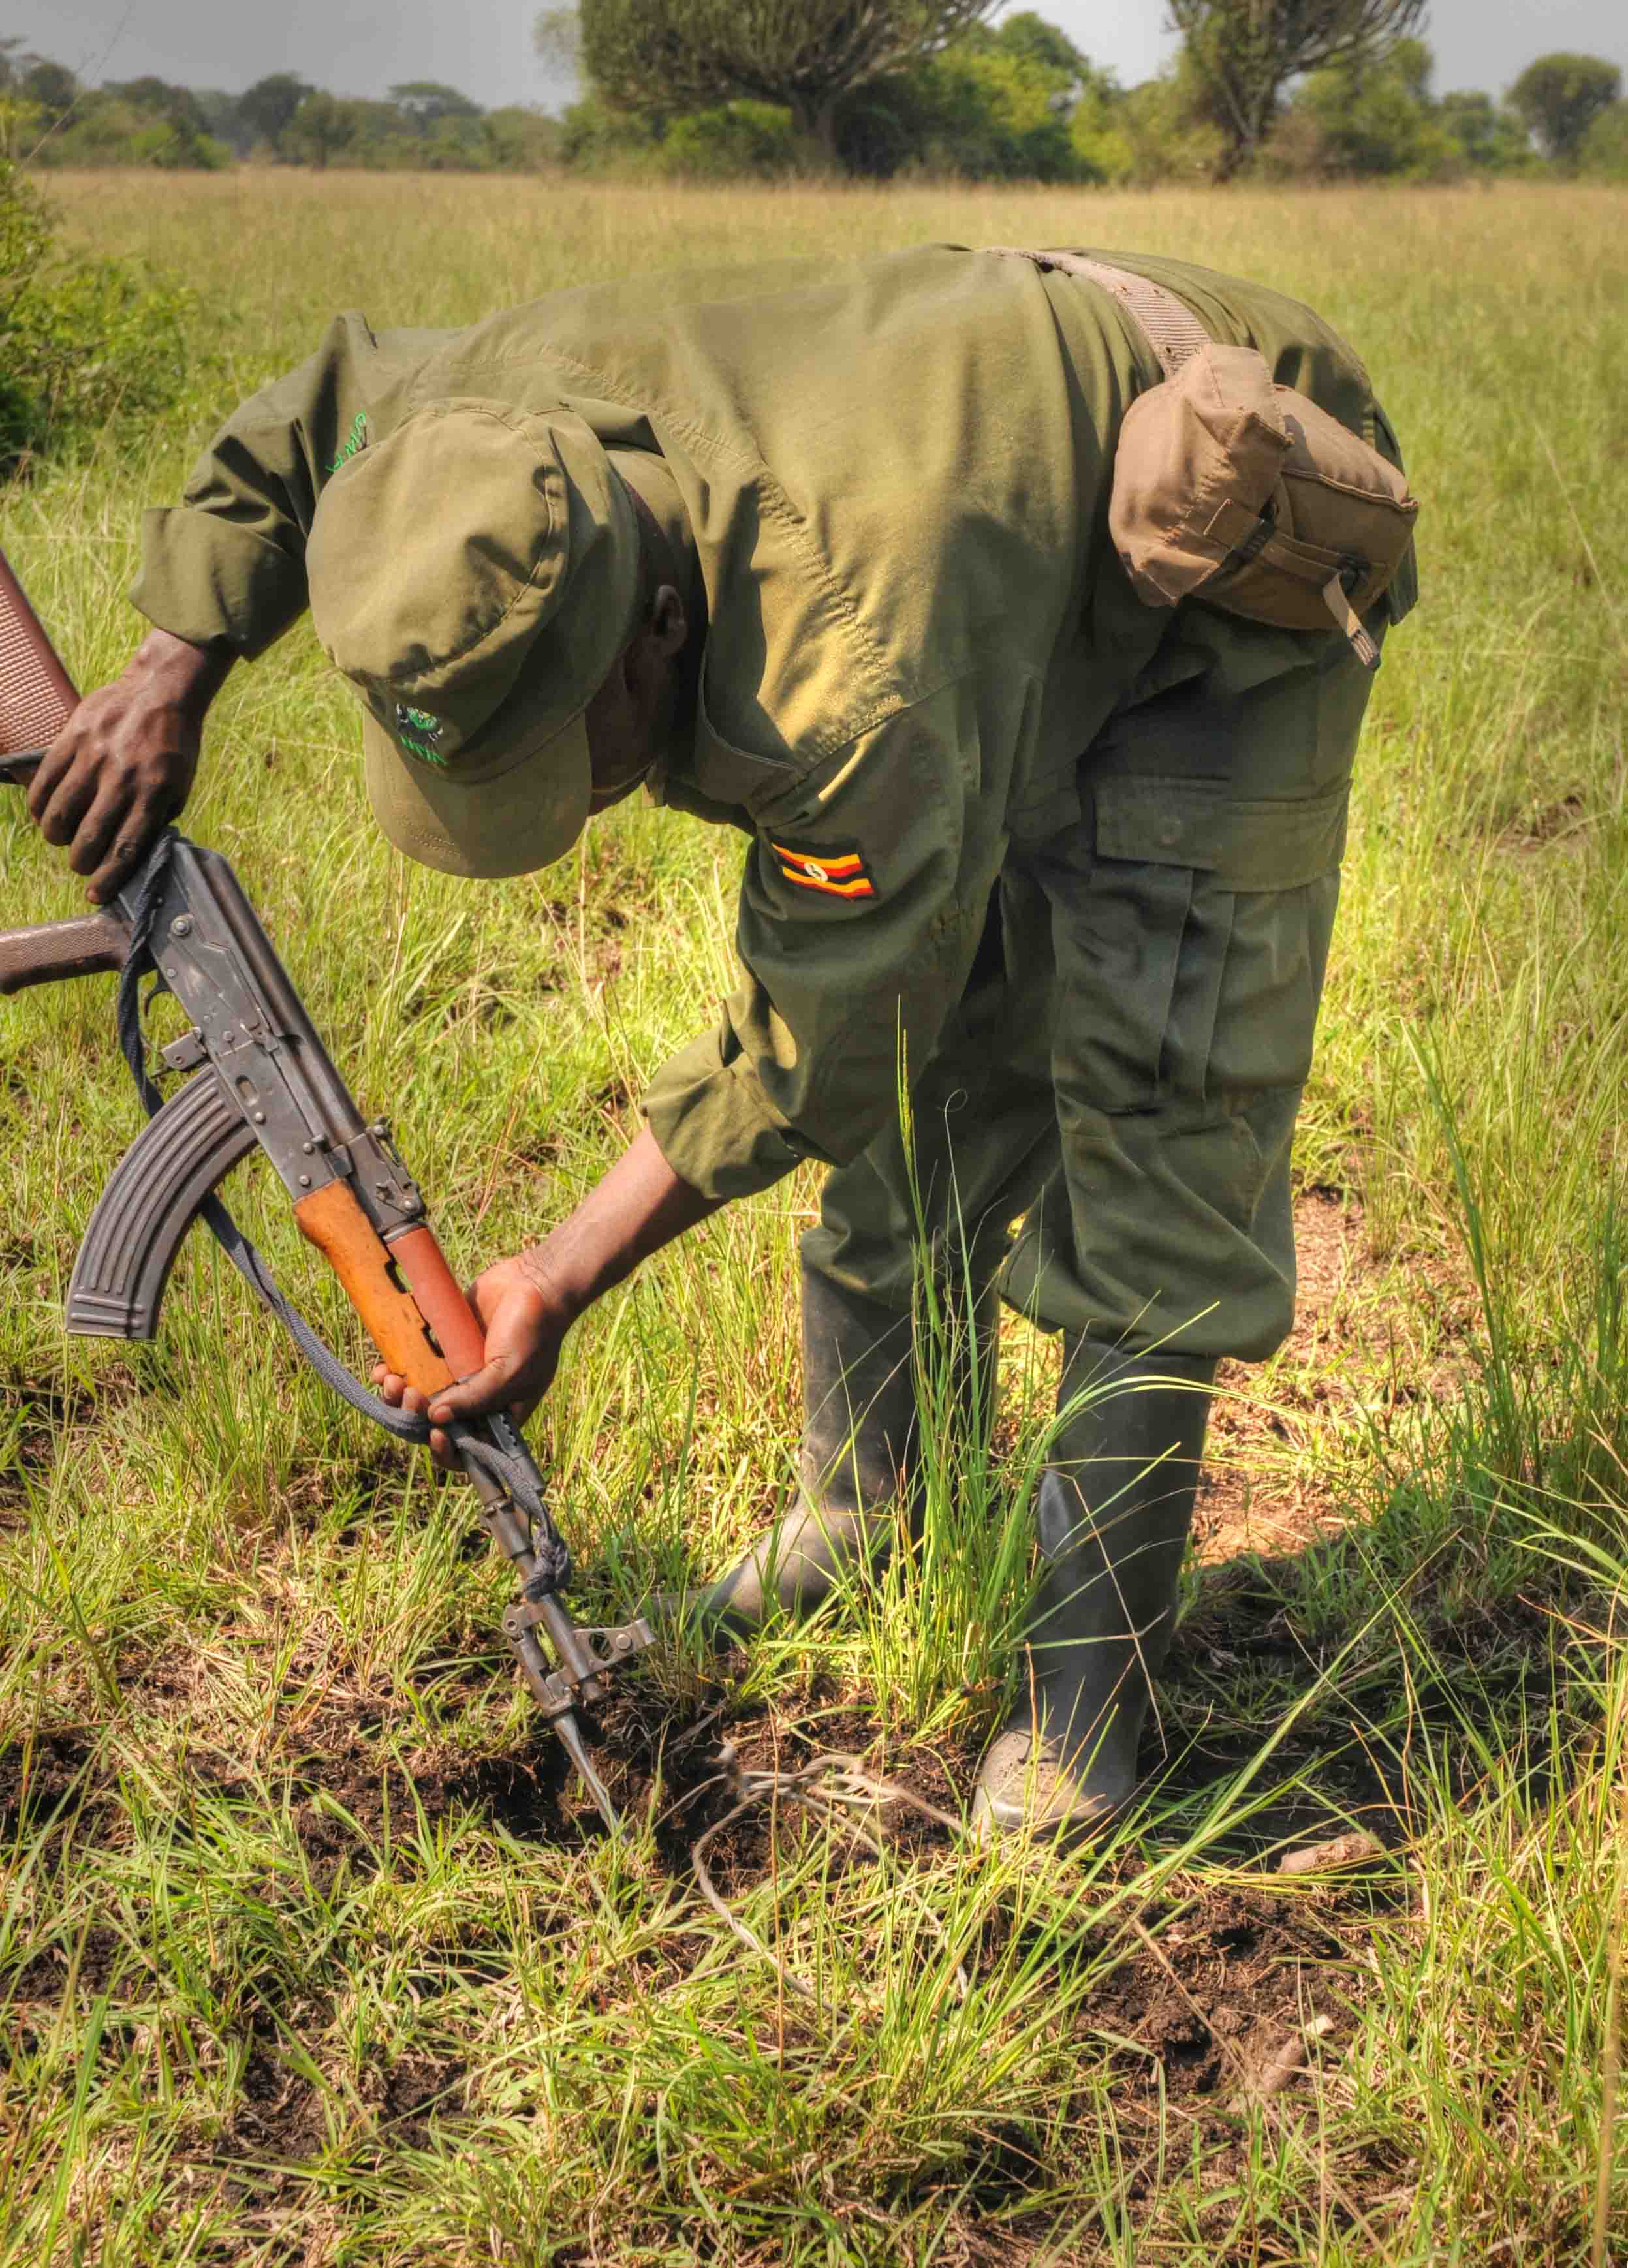 Image: Guard removing snare (credit: Dr Andrew Plumptre, Wildlife Conservation Society)